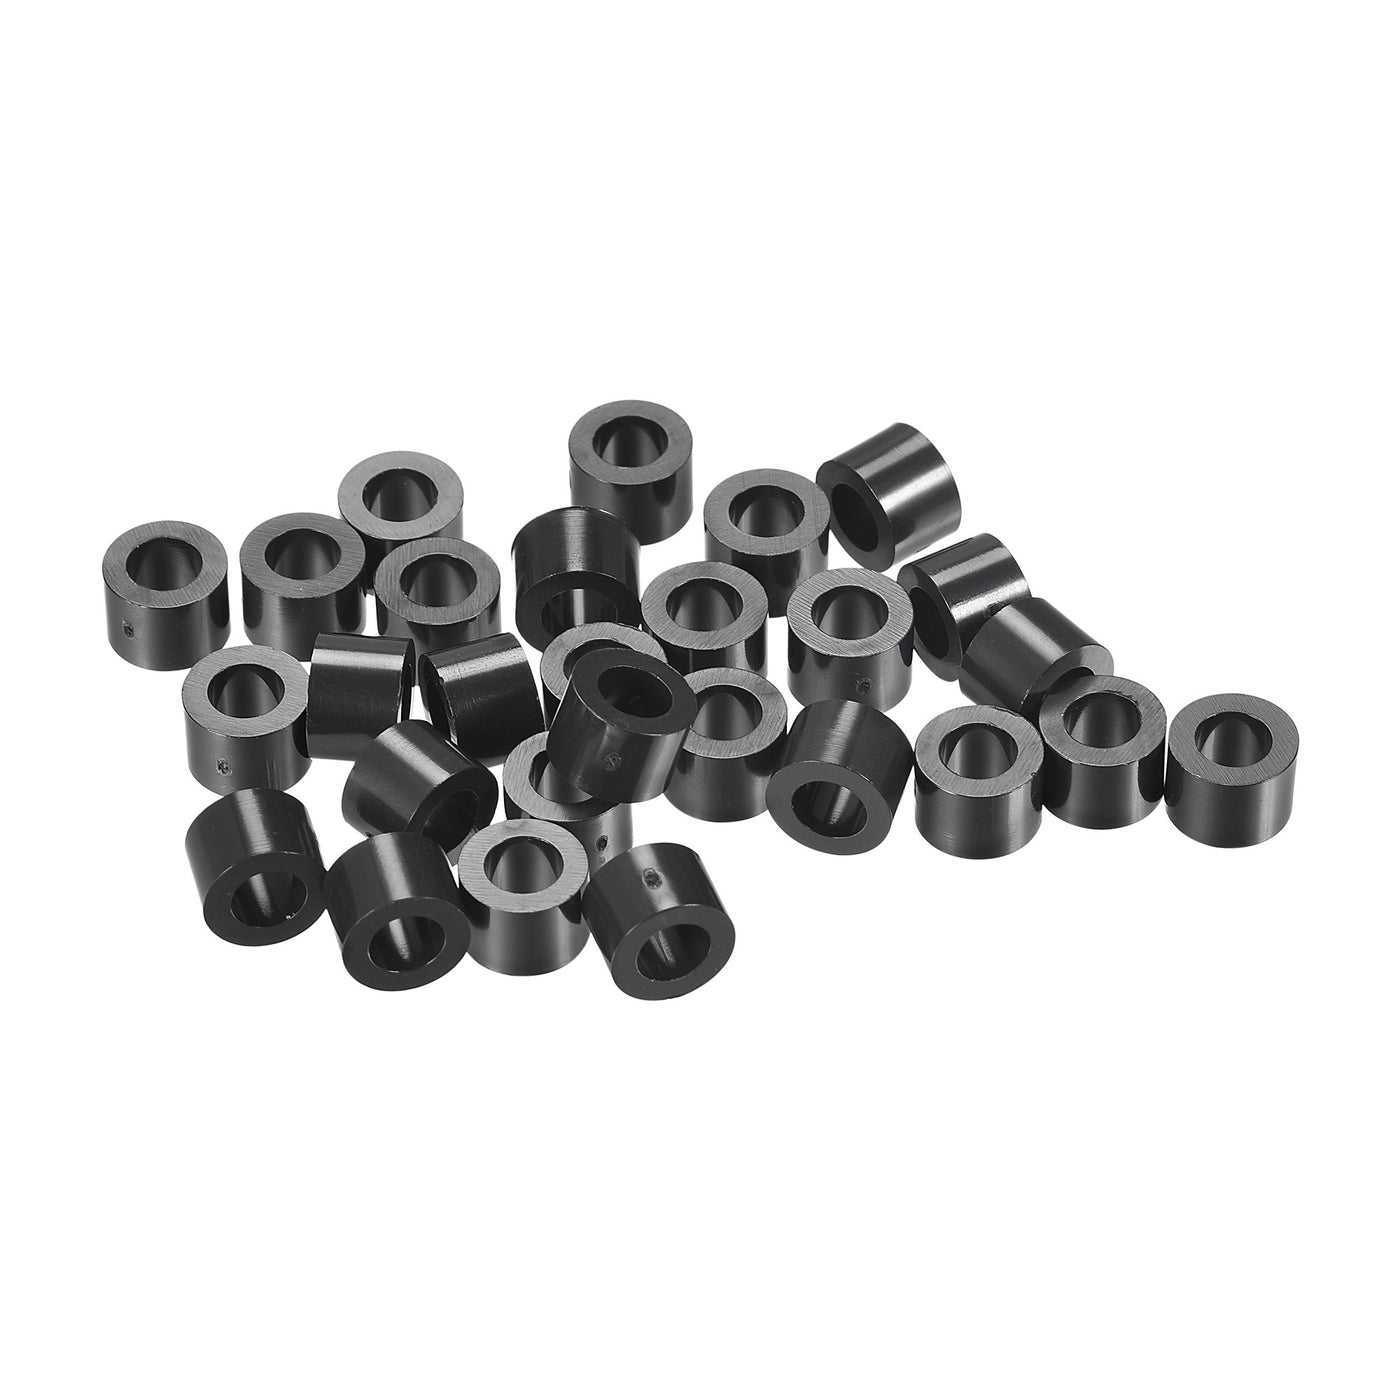 Uxcell Uxcell ABS Round Spacer Washer ID 4.2mm OD 7mm L 9mm for M4 Screws, Black, 300Pcs